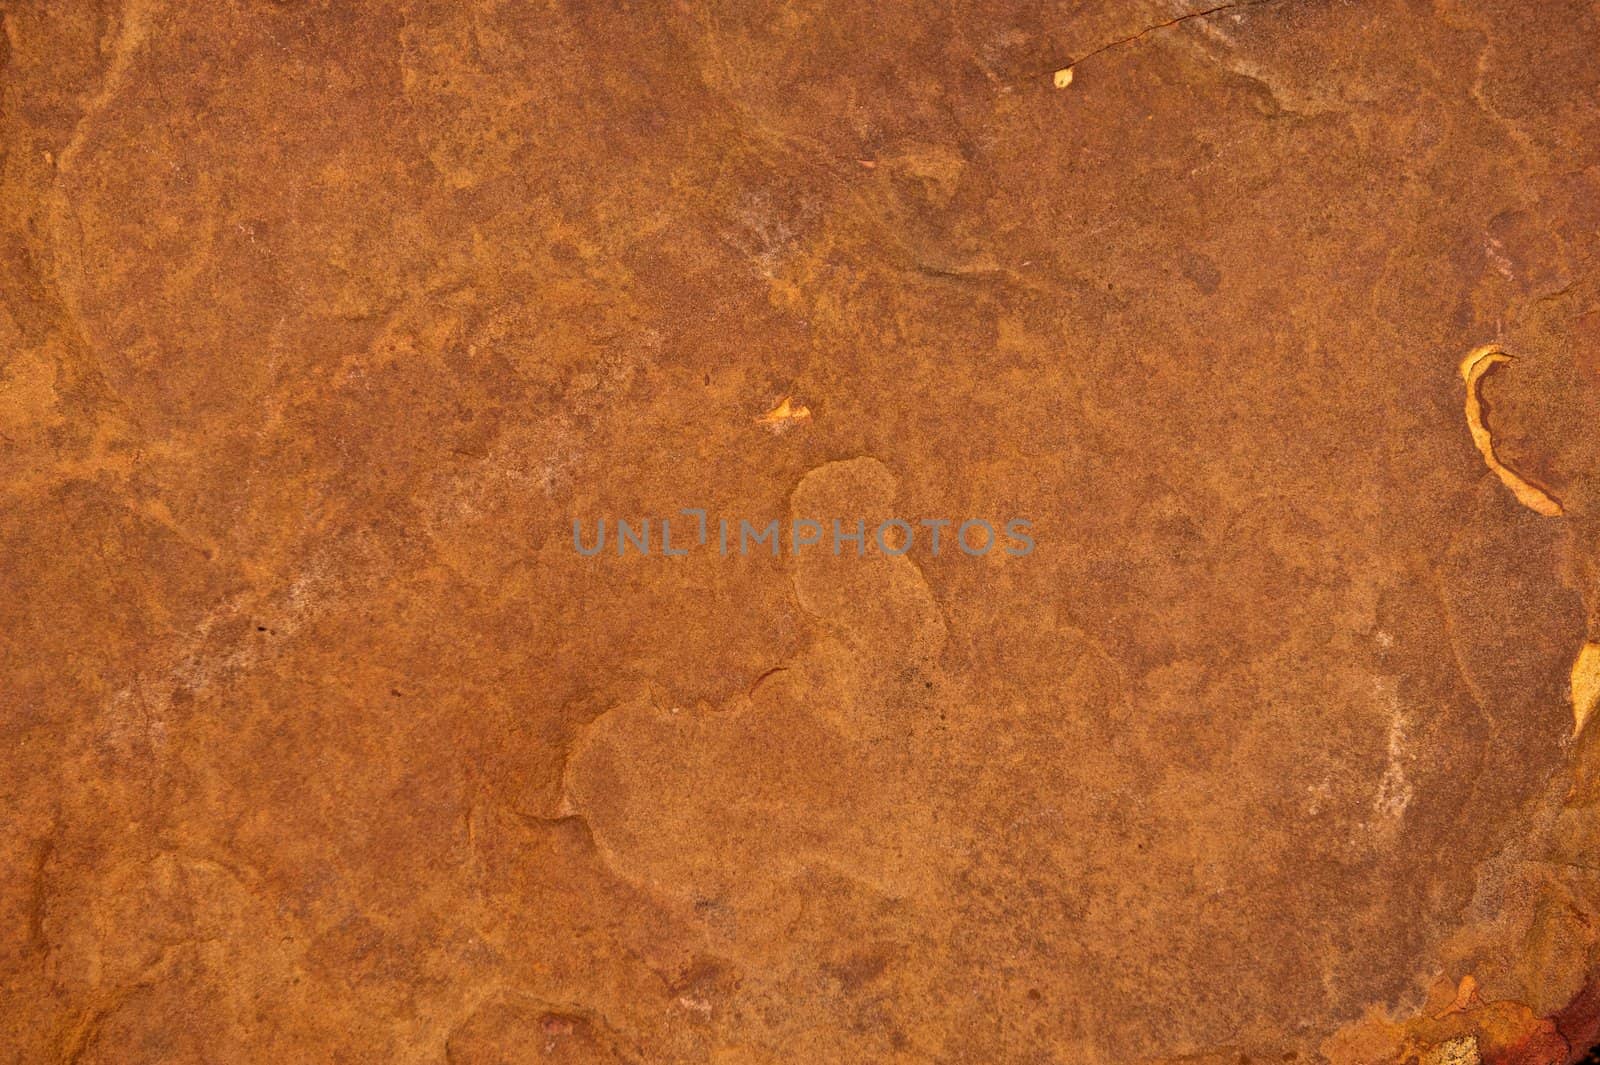 Rough stone background with cracks and pock marks on the surface of the rock